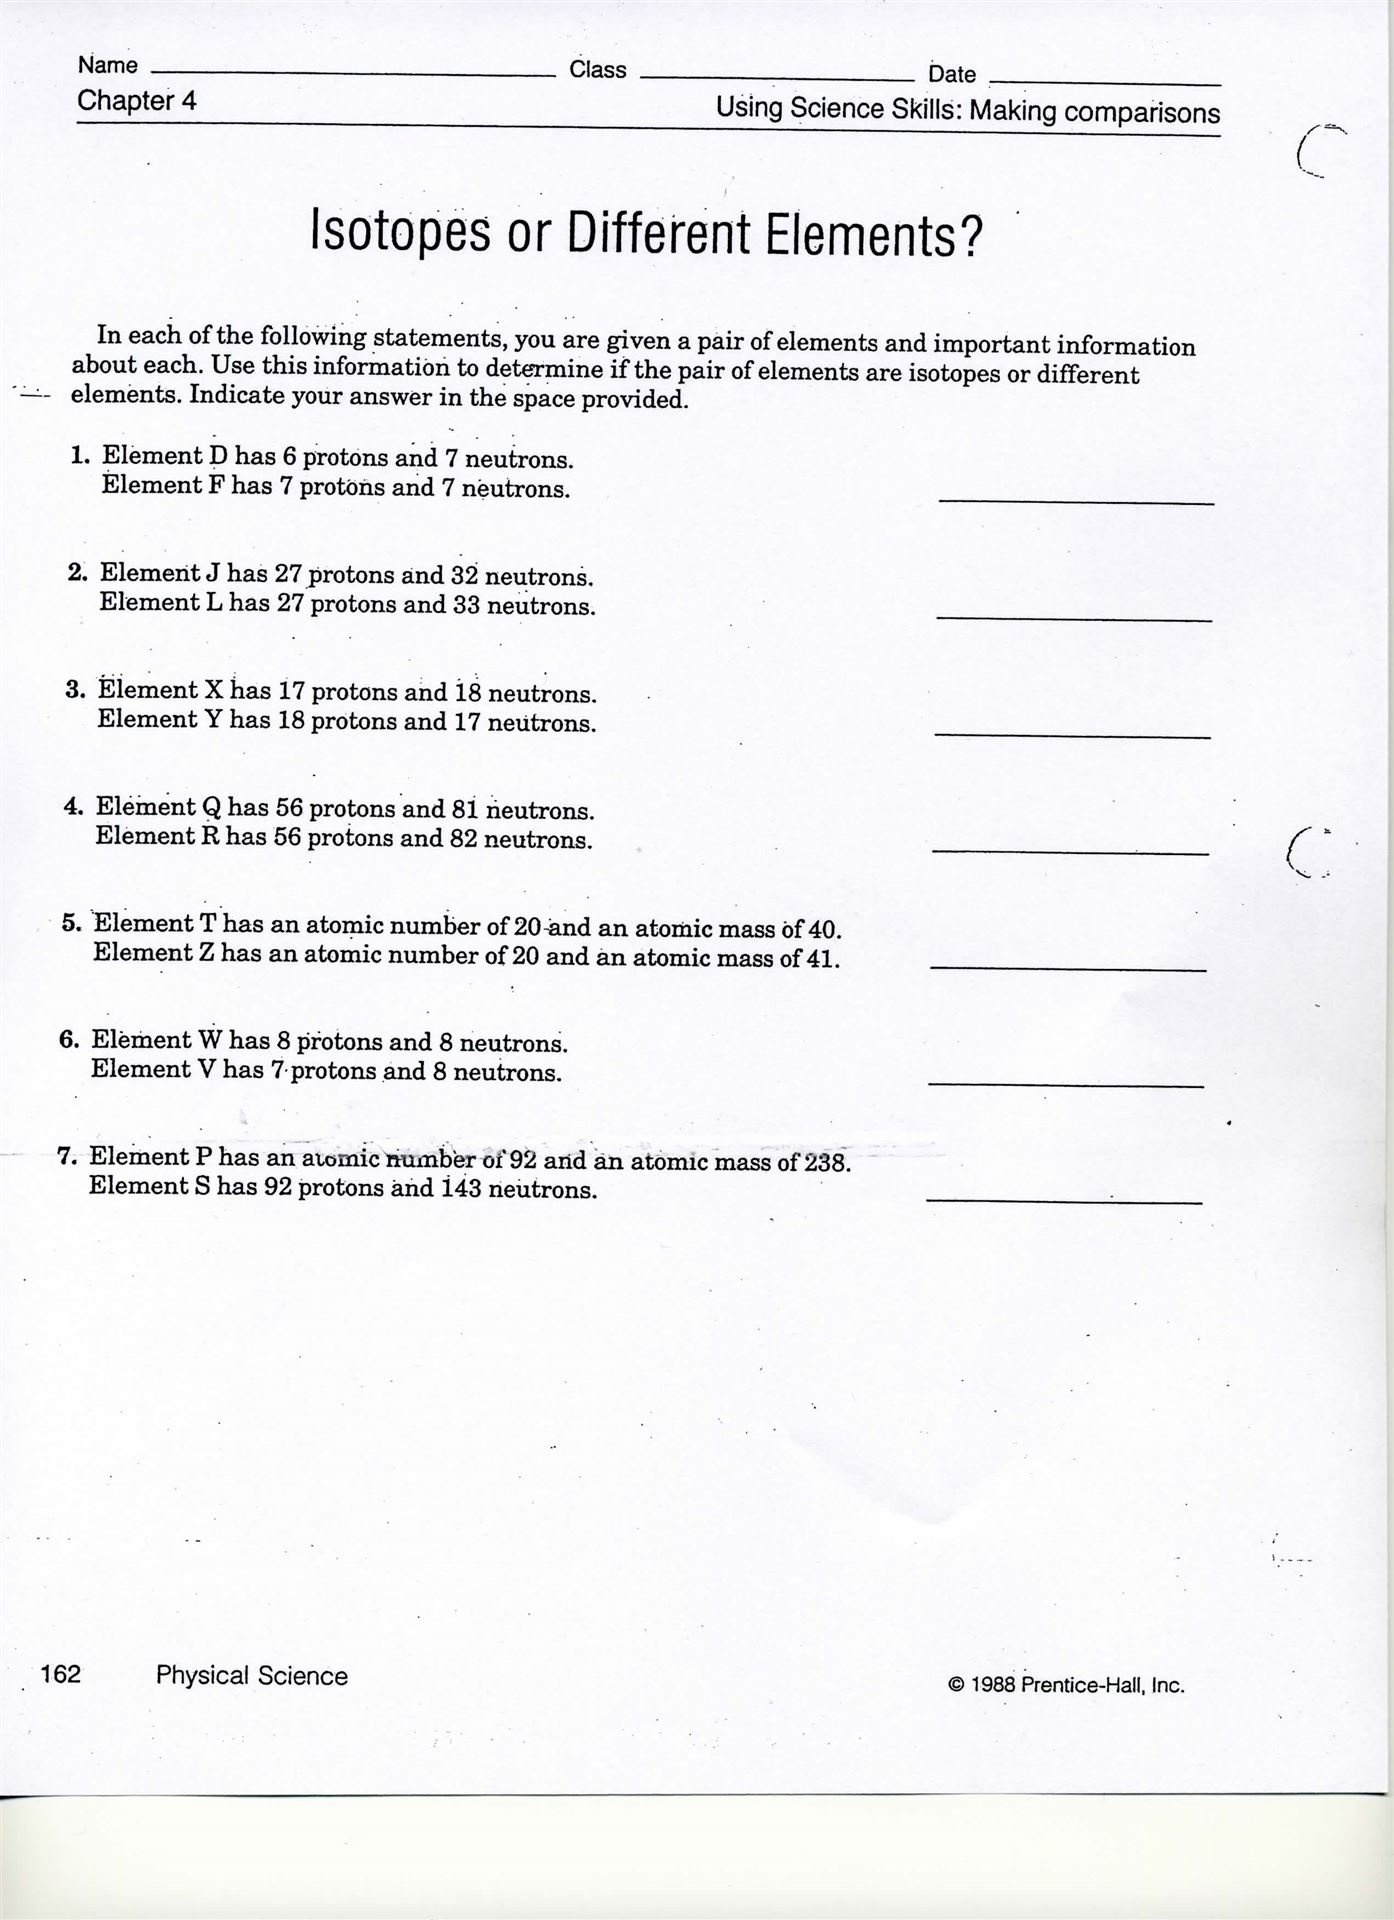 Michael Feeback  Scott County High School Pertaining To Isotopes Or Different Elements Chapter 4 Worksheet Answers